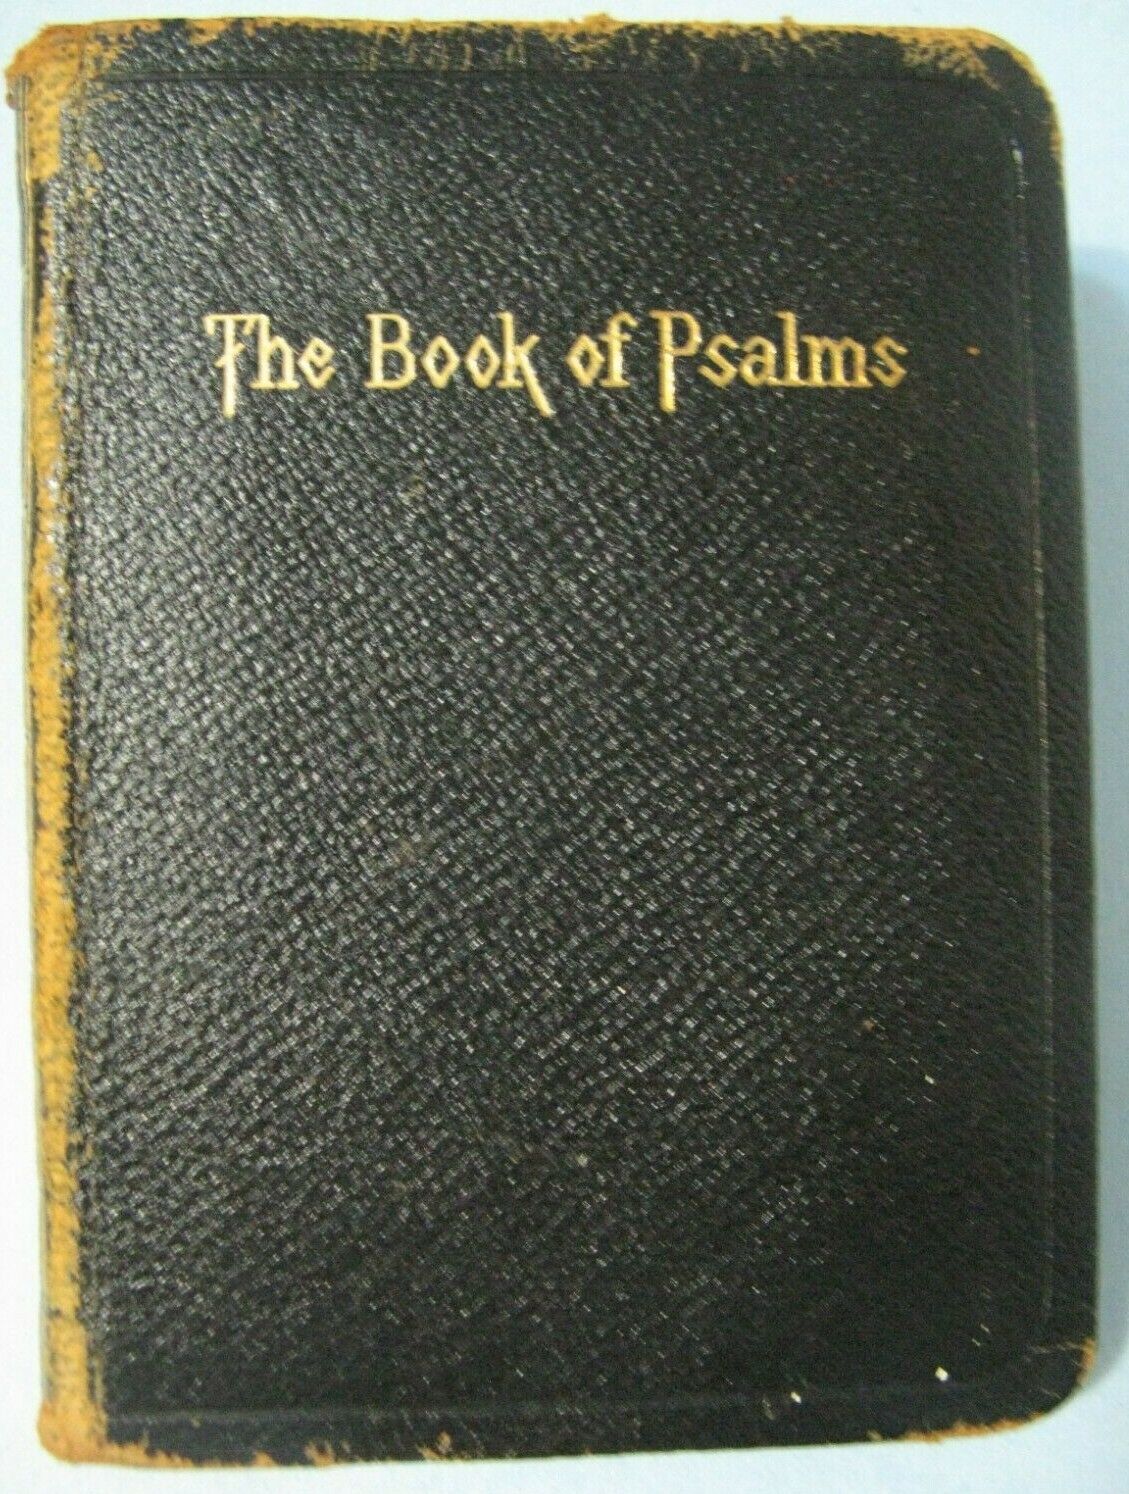 1960 The Book Of Psalms Rare Leather Pocket Edition English 